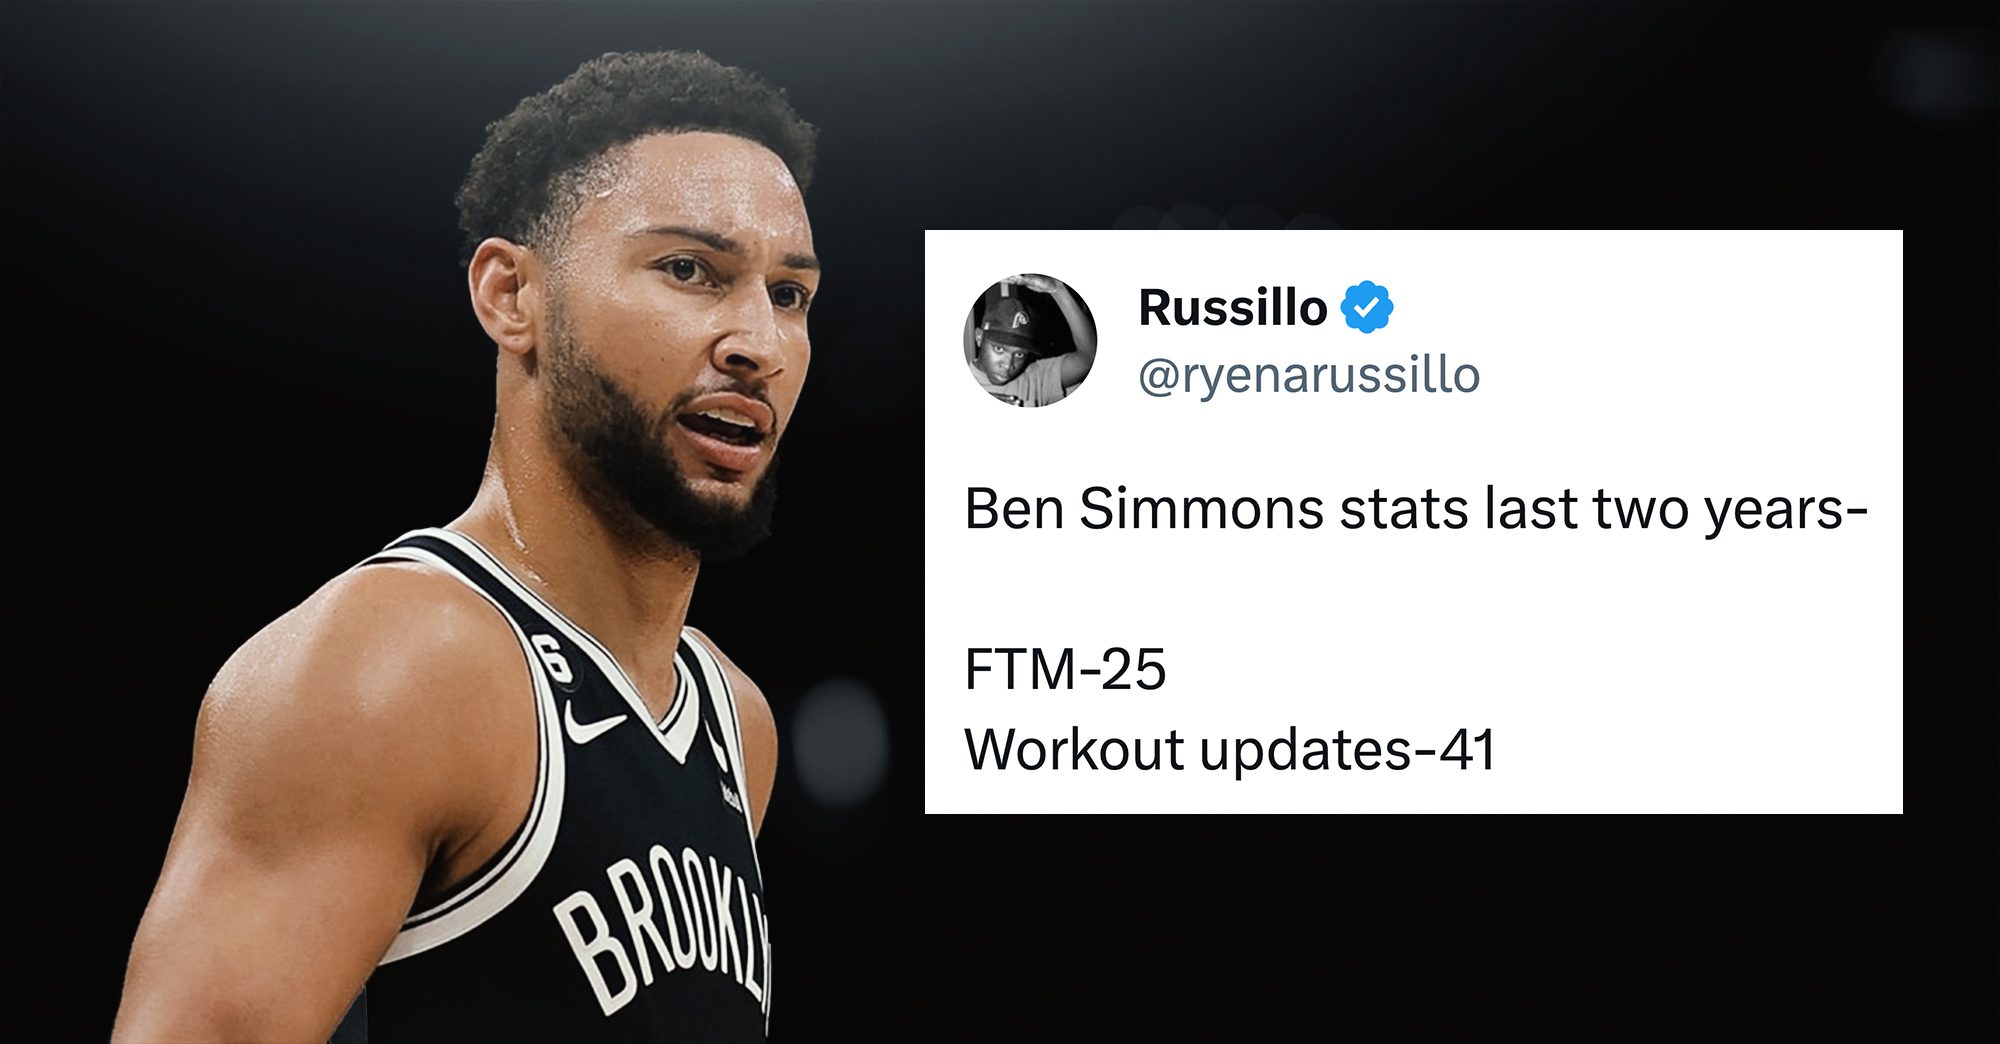 Ben Simmons Roasted After Saying He Plans to ‘Dominate’ This Season